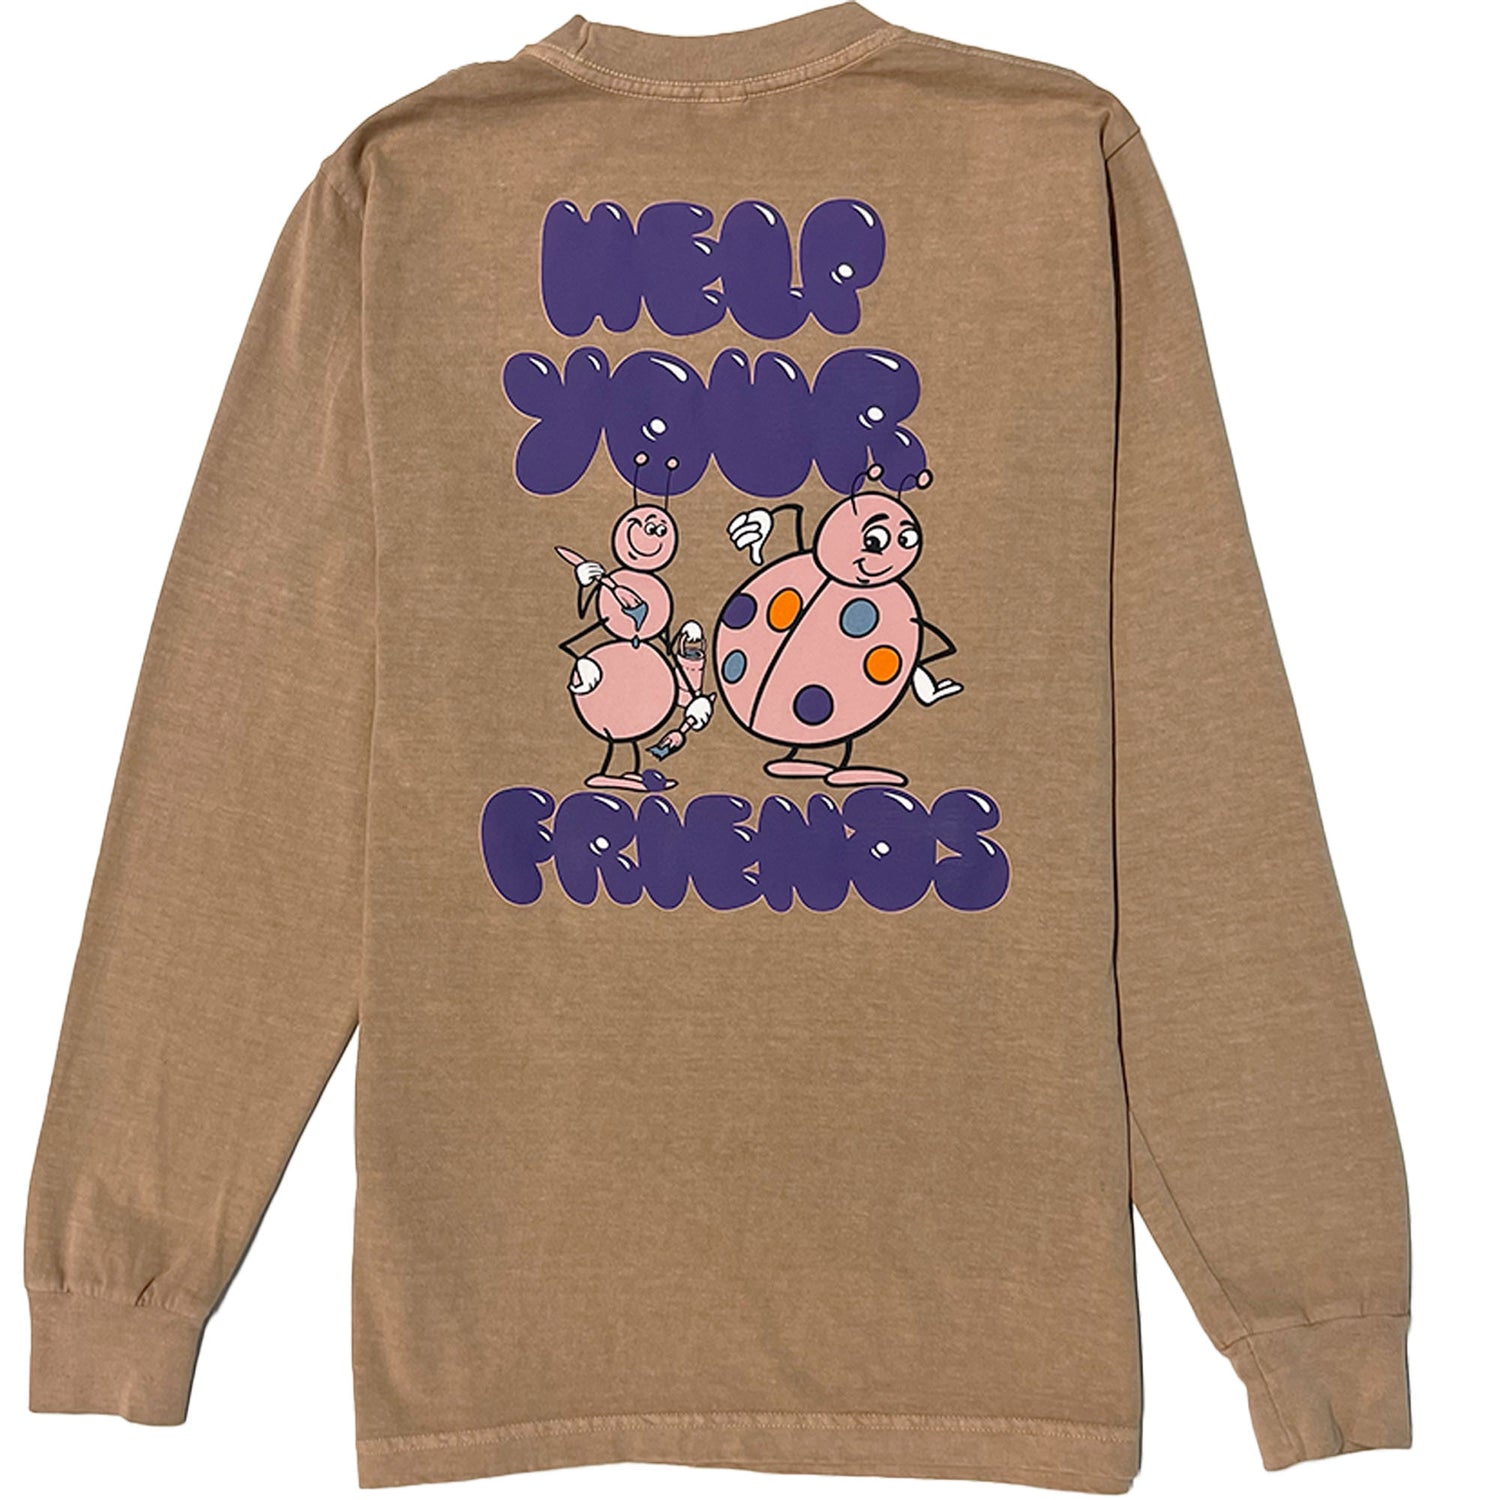 HELP YOUR FRIENDS LONG SLEEVE TEE - SAND PIGMENT